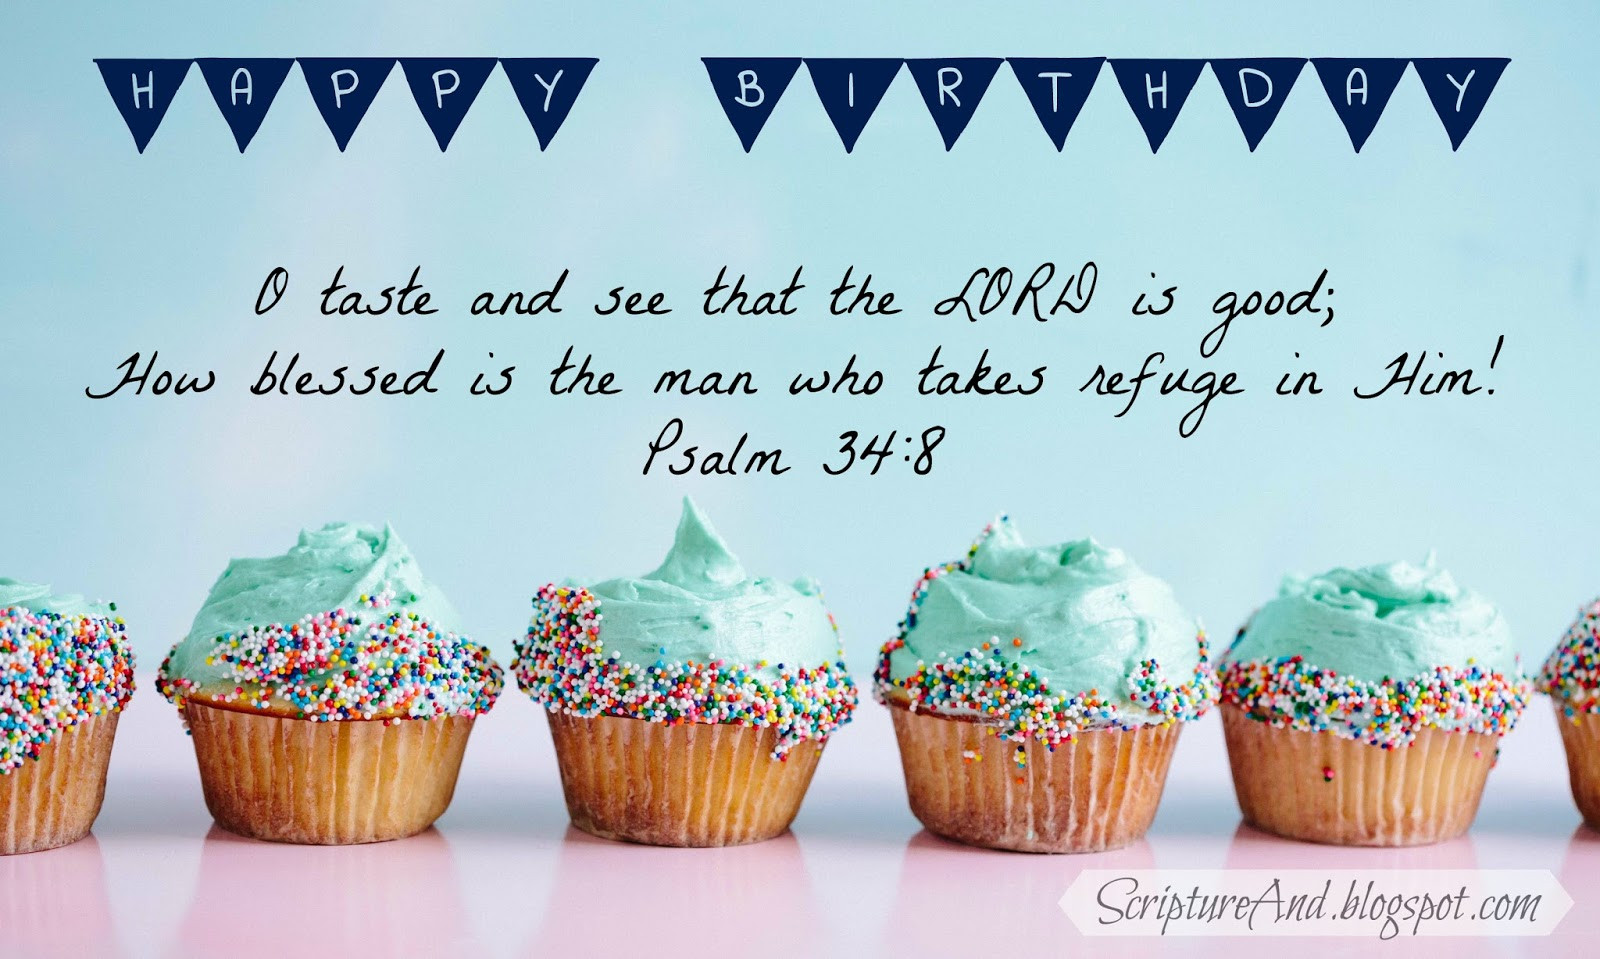 Bible Quotes About Birthdays
 Scripture and Free Birthday with Bible Verses